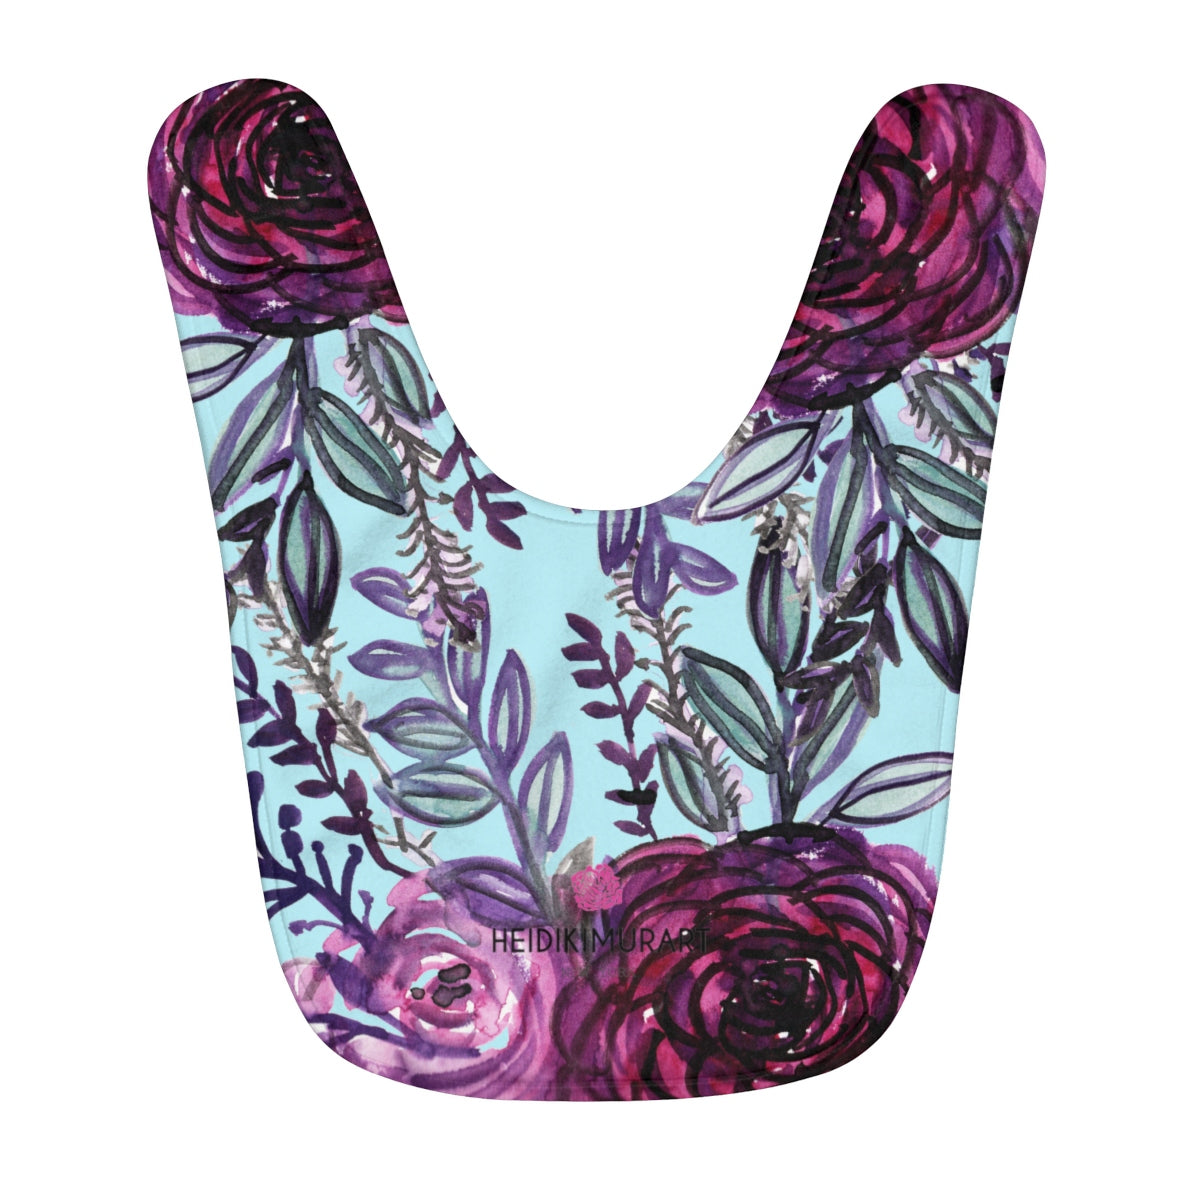 Blue Purple Floral Rose Cute Toddler Fleece Baby Bib - Designed and Made in USA-Kids clothes-One Size-Heidi Kimura Art LLC